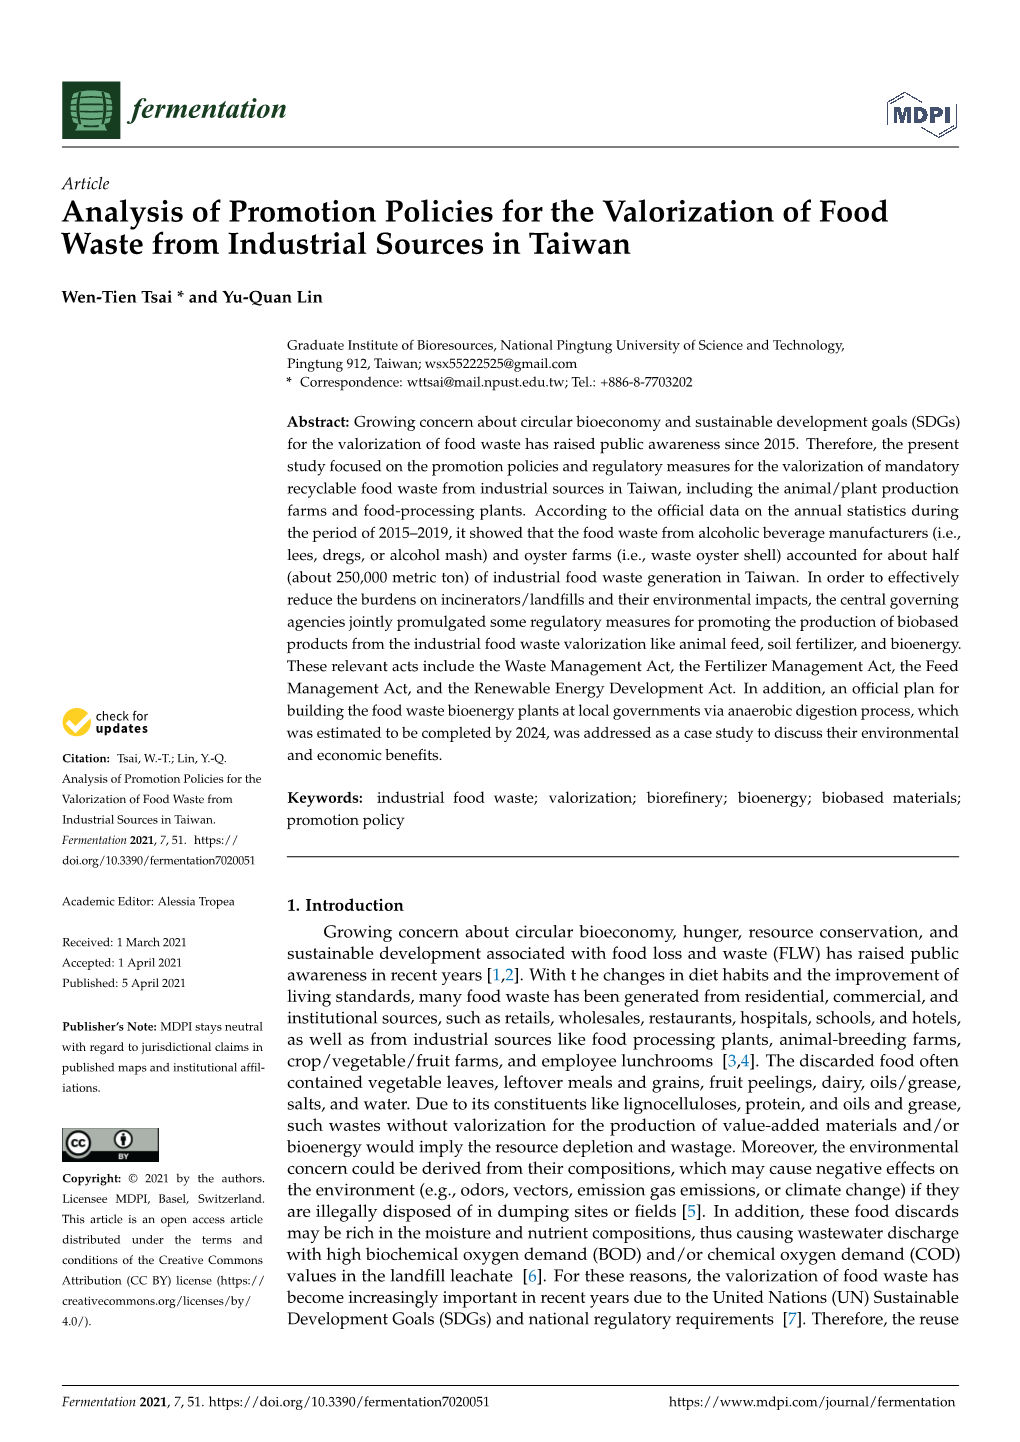 Analysis of Promotion Policies for the Valorization of Food Waste from Industrial Sources in Taiwan